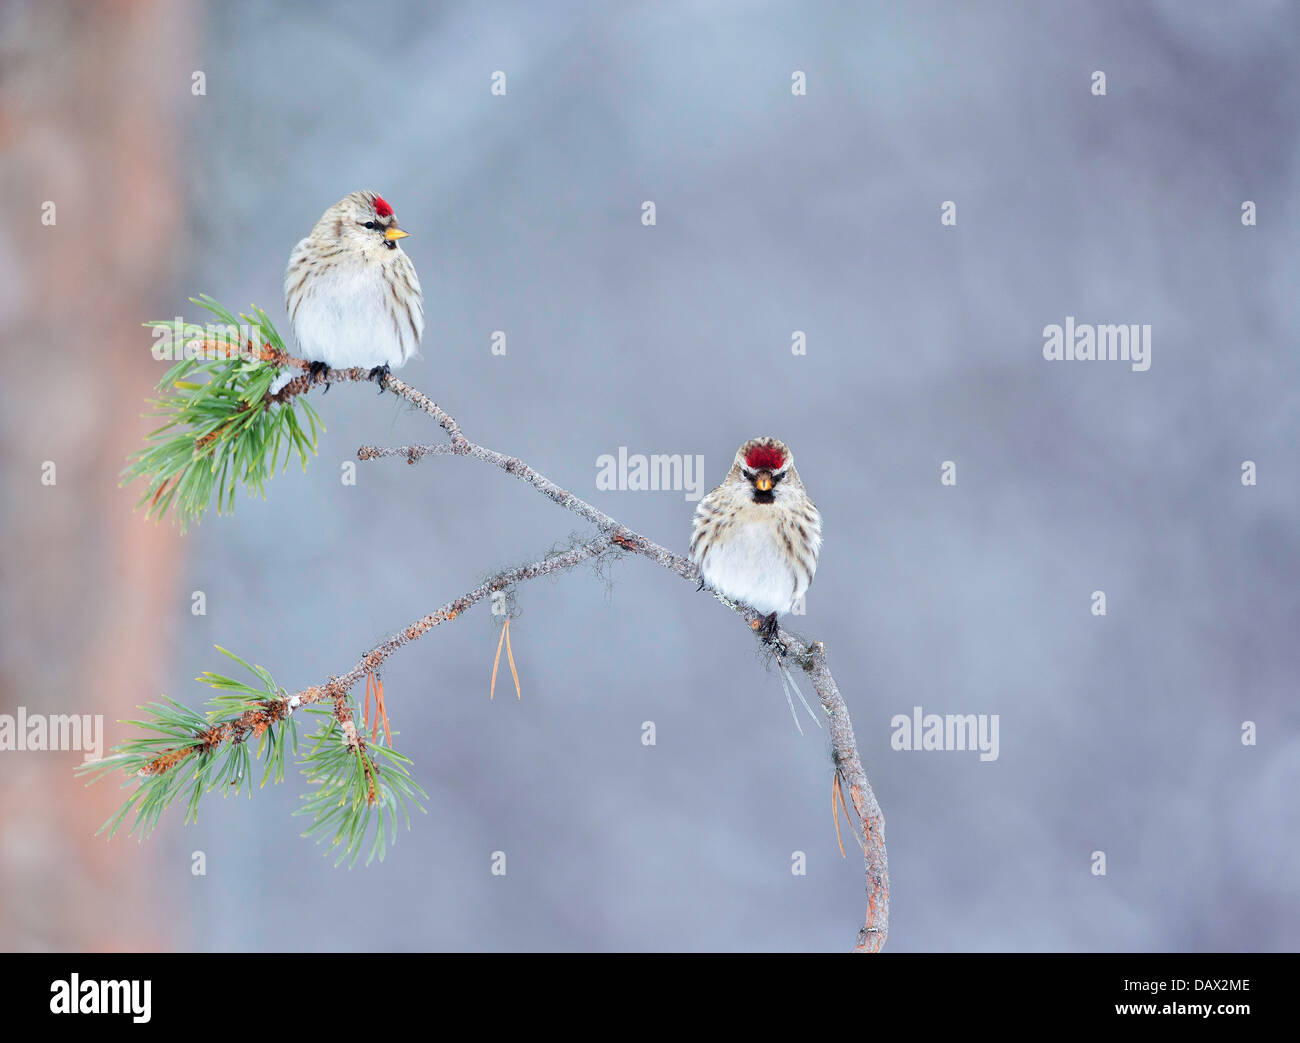 Arctic Redpoll fighting on a snowy branch Stock Photo